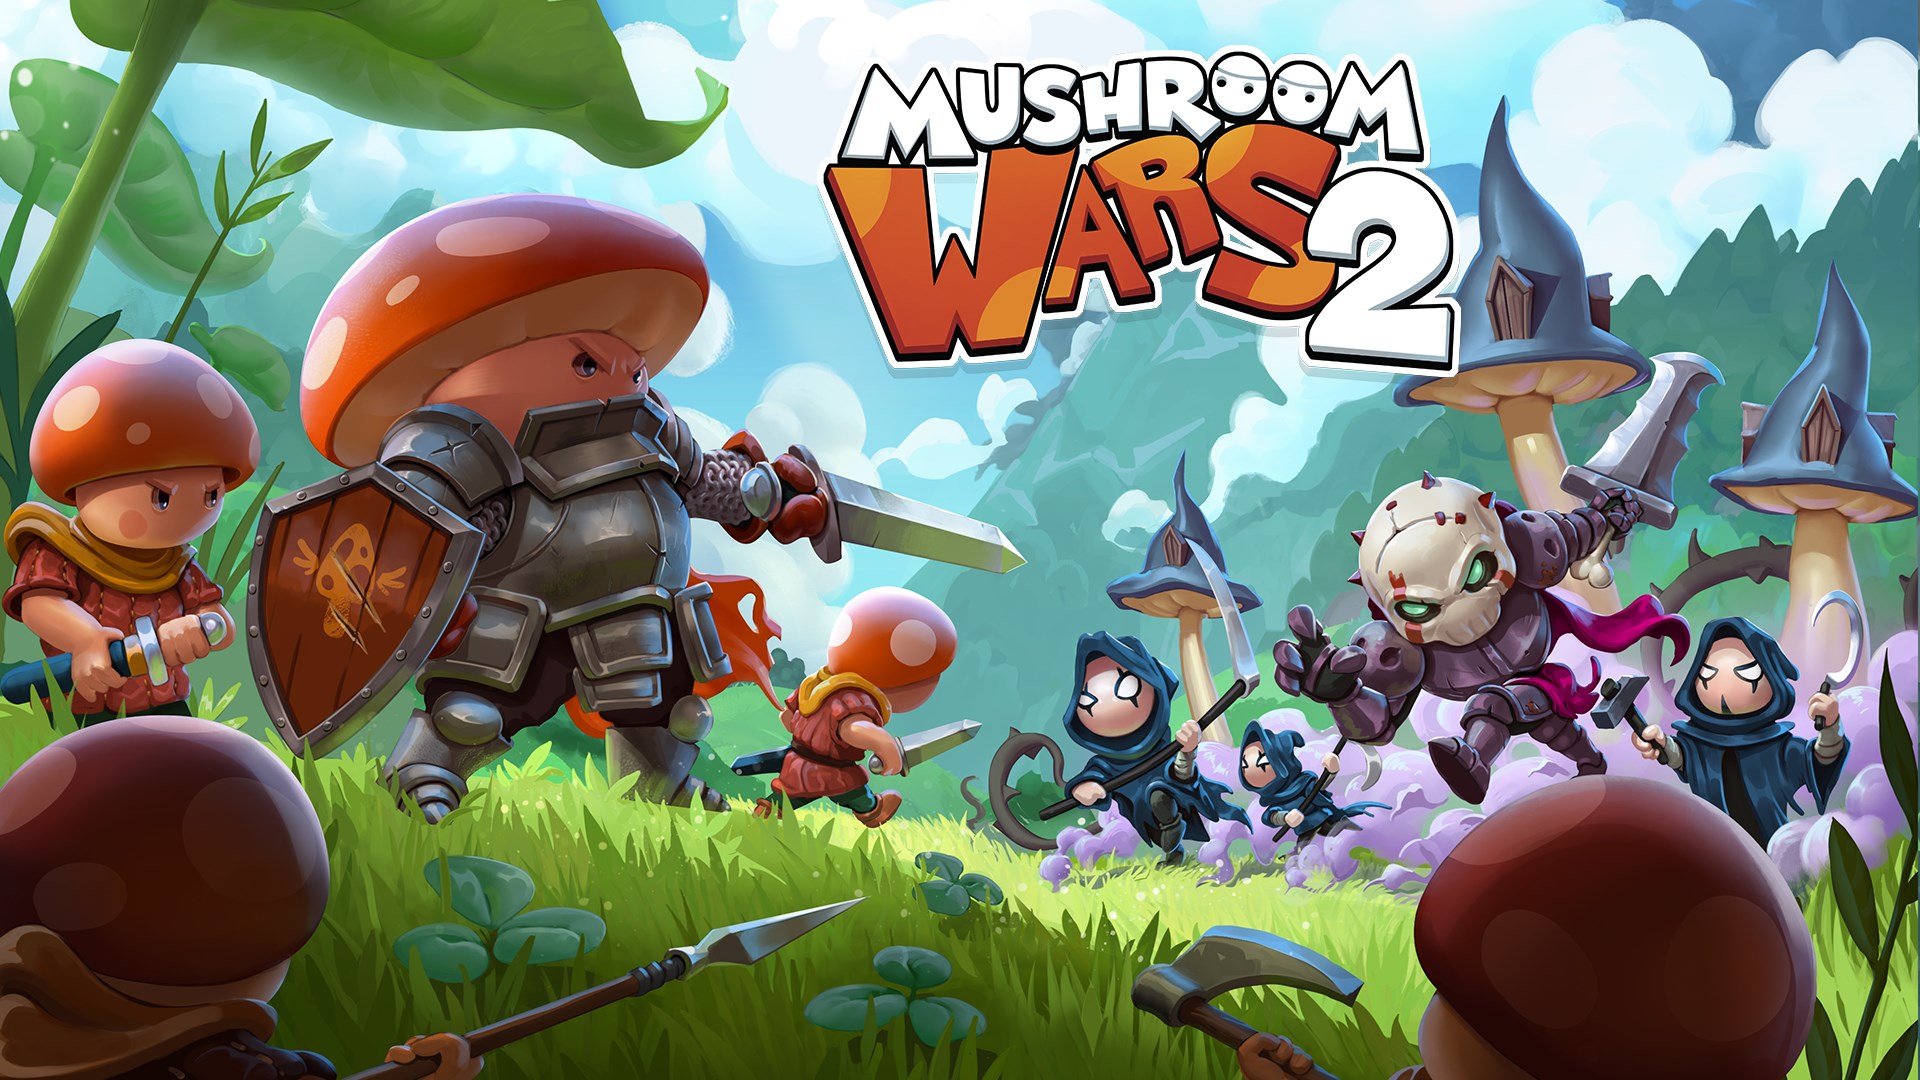 Mushroom Wars 2 Is Now Available For Xbox One And Xbox Series X|S